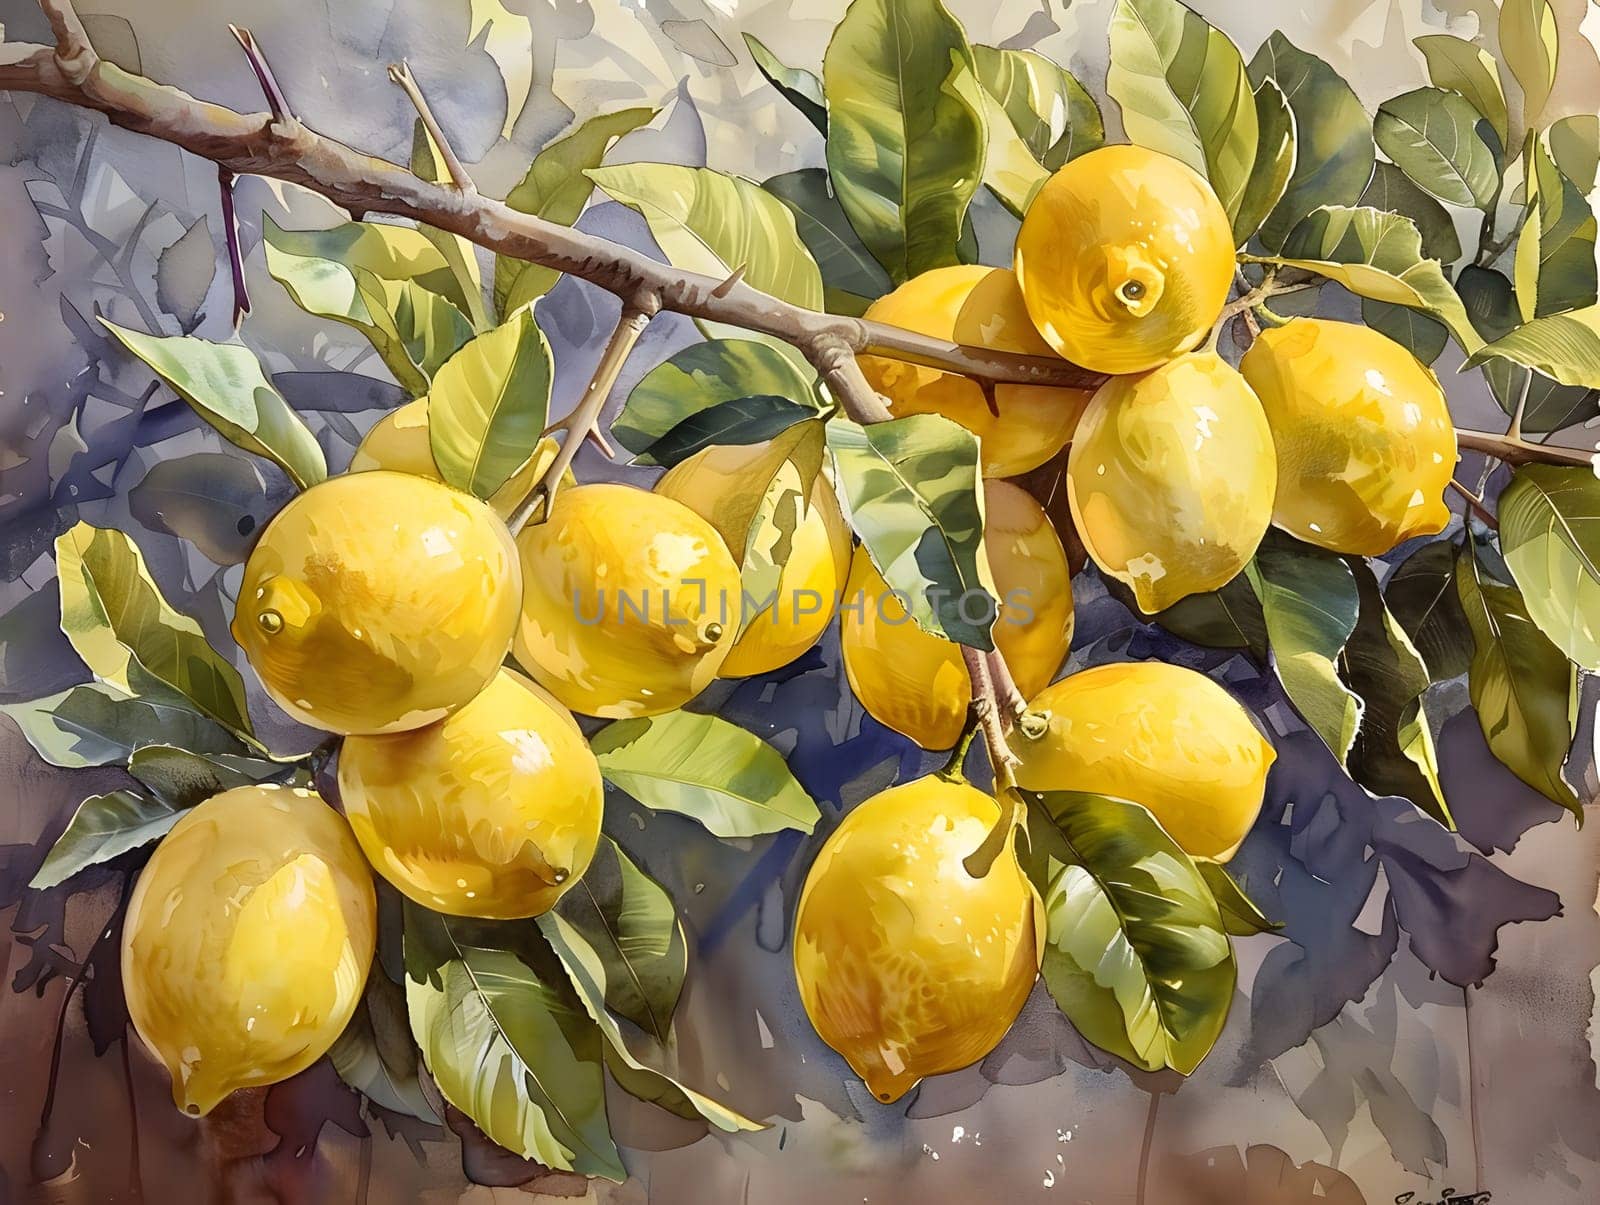 A depiction of ripe lemons hanging from a citrus tree branch, showcasing the natural beauty of this fruitbearing plant